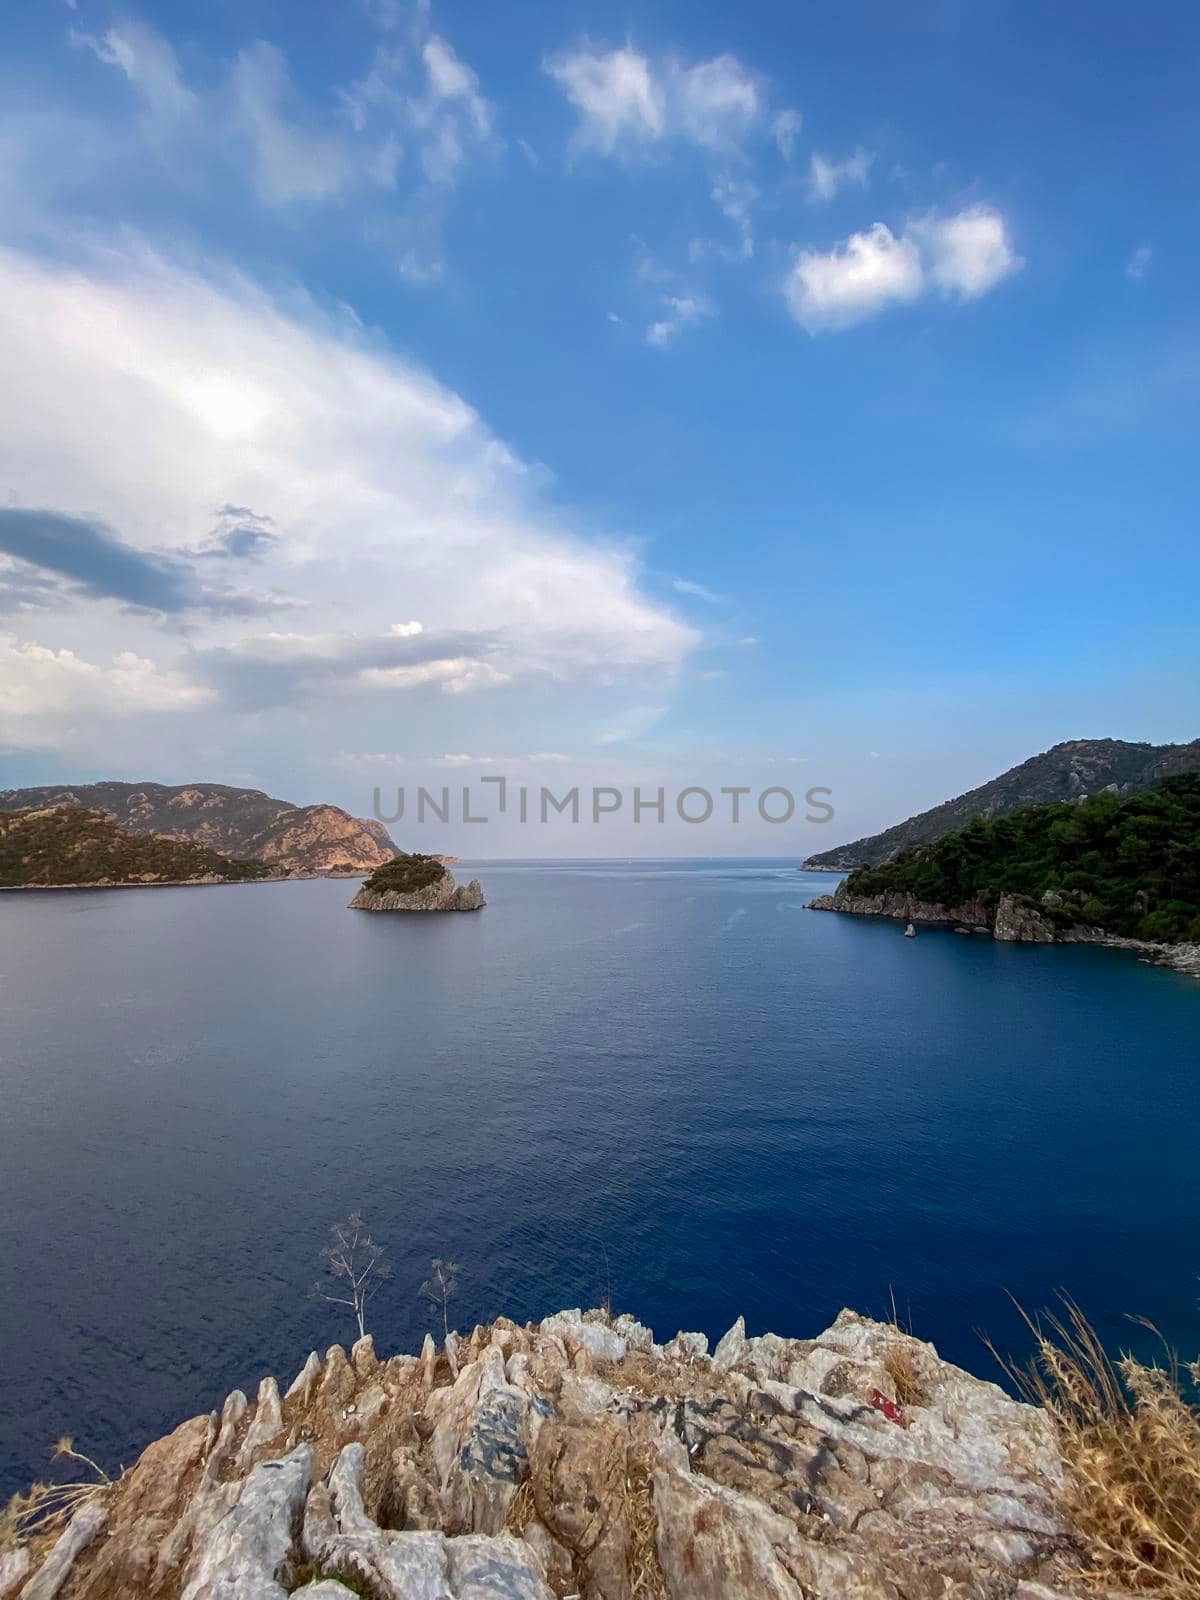 Aerial view of Marmaris at sunset, Turkey. View of the fortress and ships near the embankment. - stock photo. High quality photo